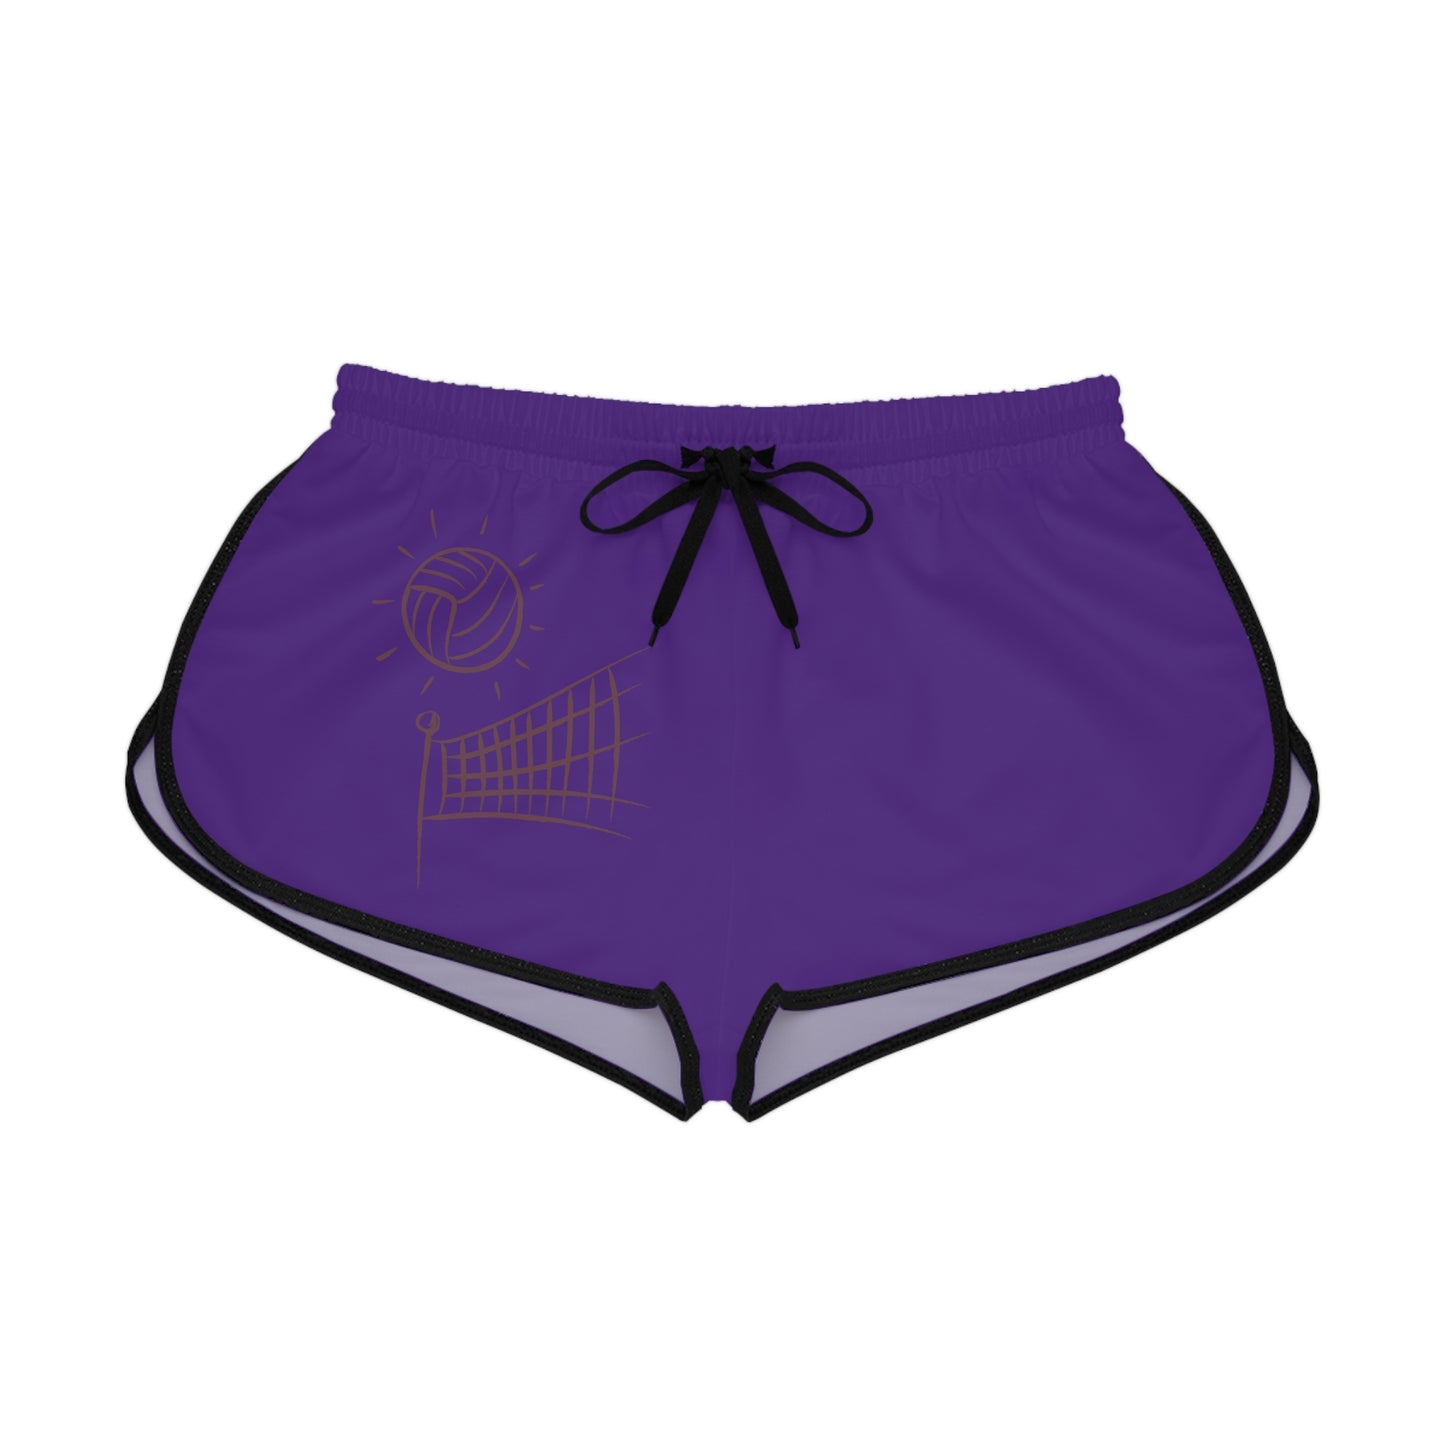 Women's Relaxed Shorts: Volleyball Purple